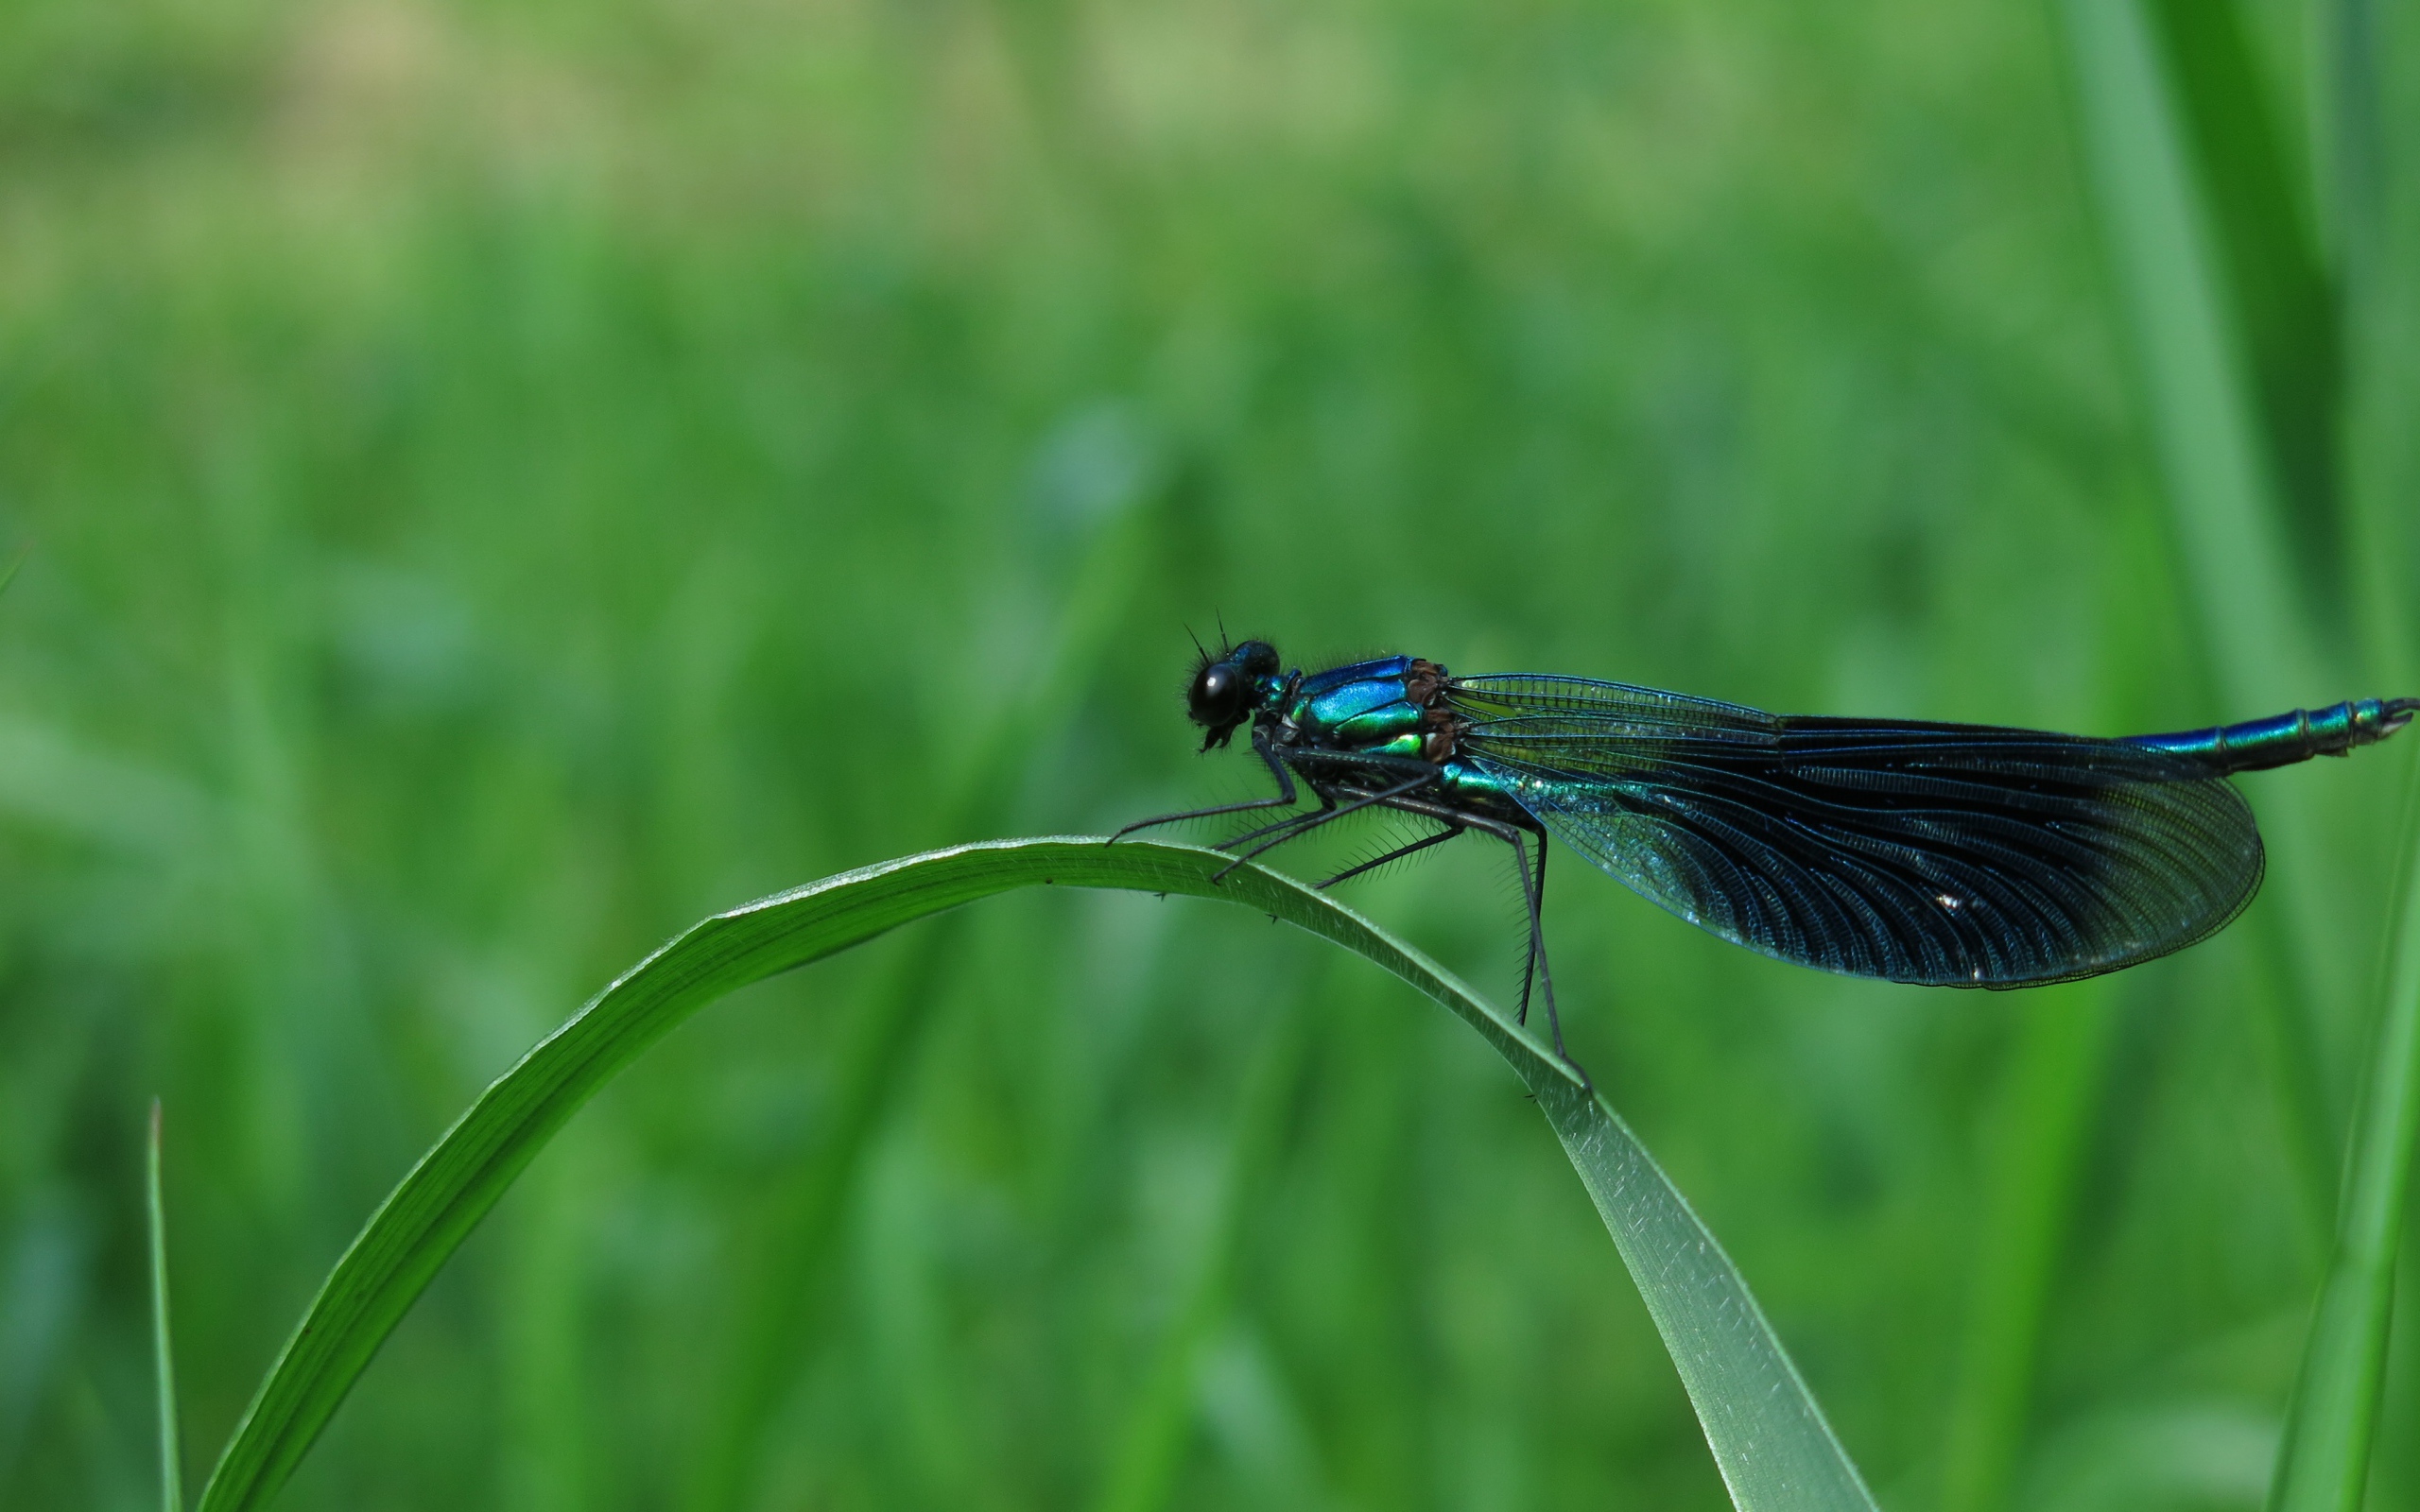 A large black dragonfly sits on the green grass